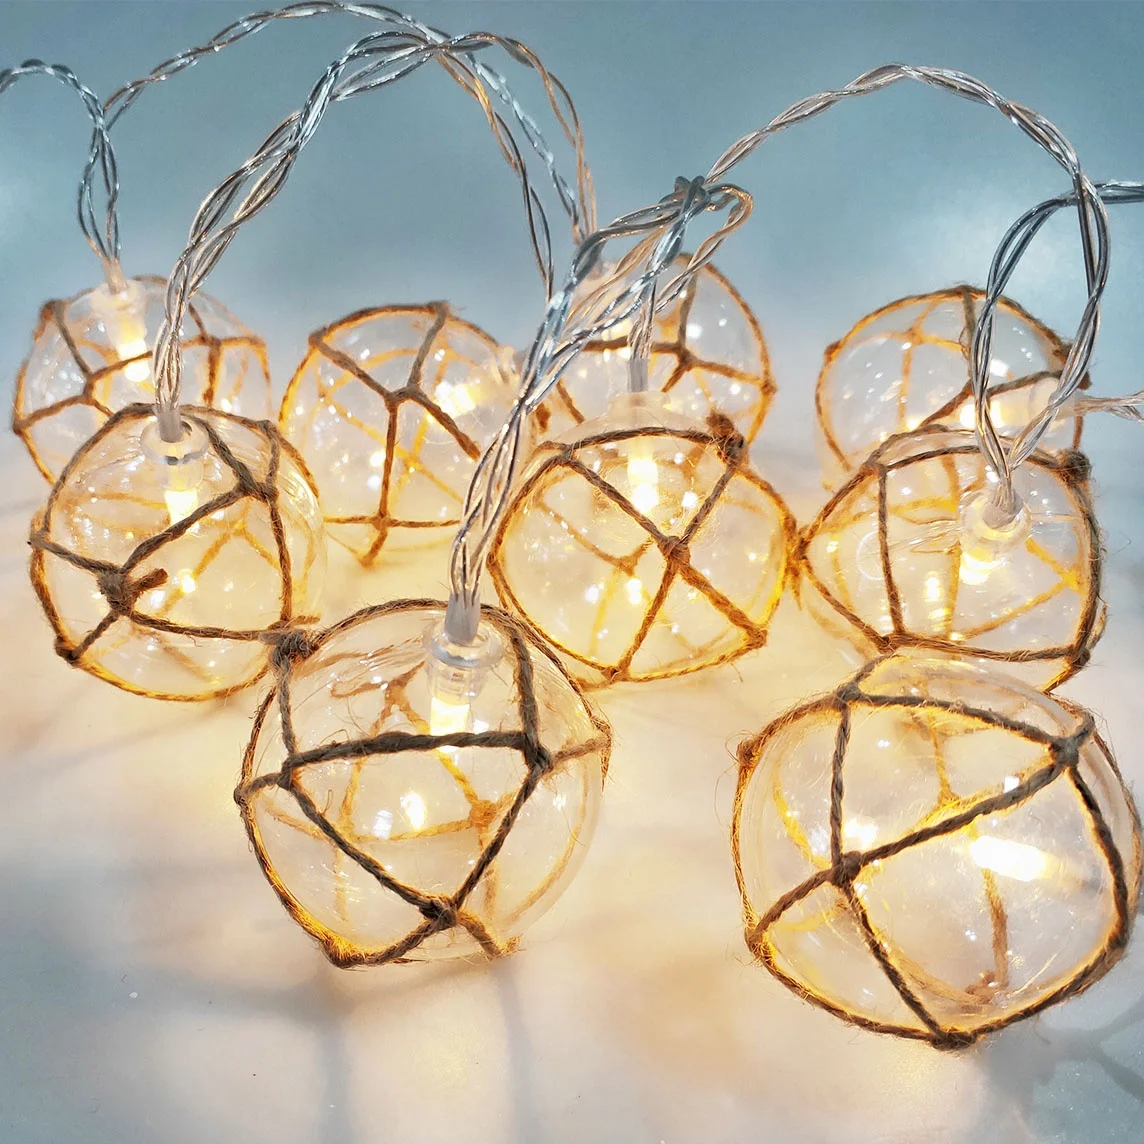 Bolylight Hot Sale In Amazon Ball  With Rope Outdoor Led Christmas String Lights